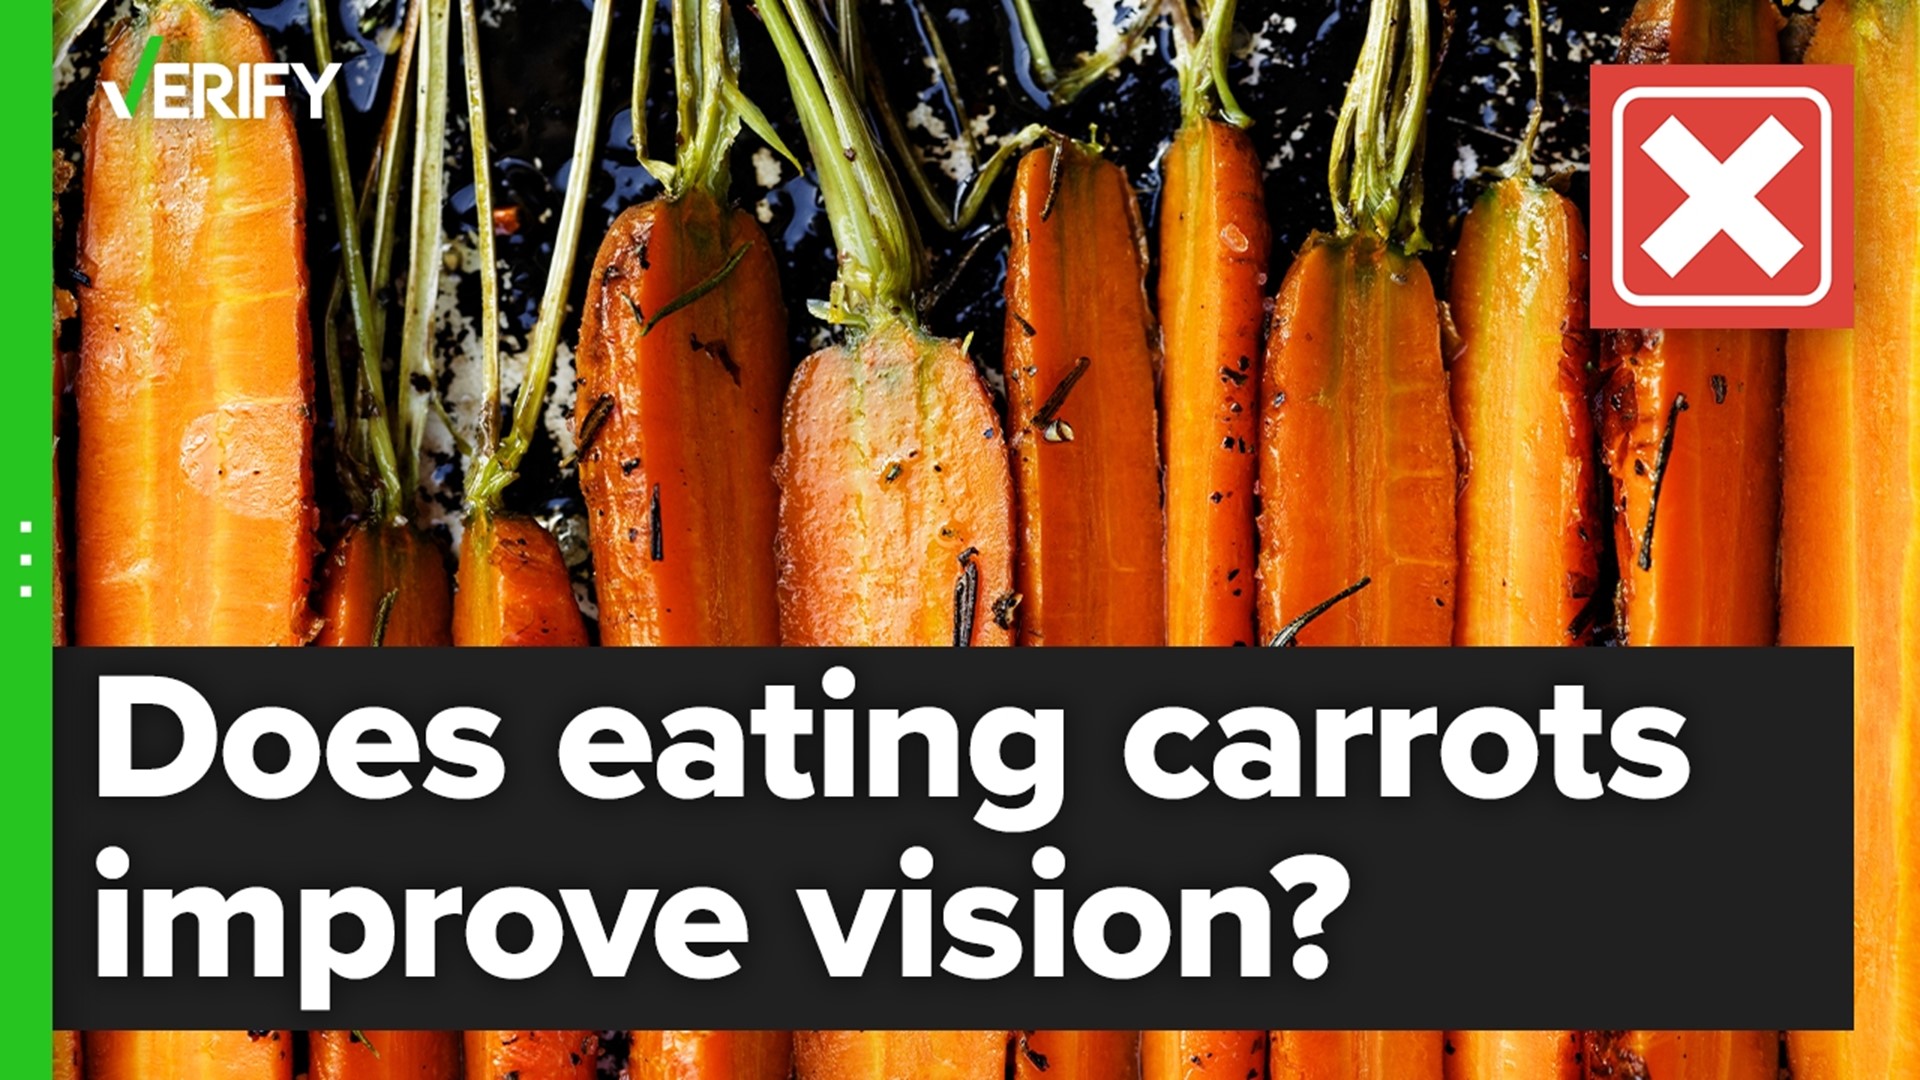 Carrots are high in beta-carotene, which is good for eye health. But they won’t do anything for your vision if you don’t have a vitamin A deficiency.